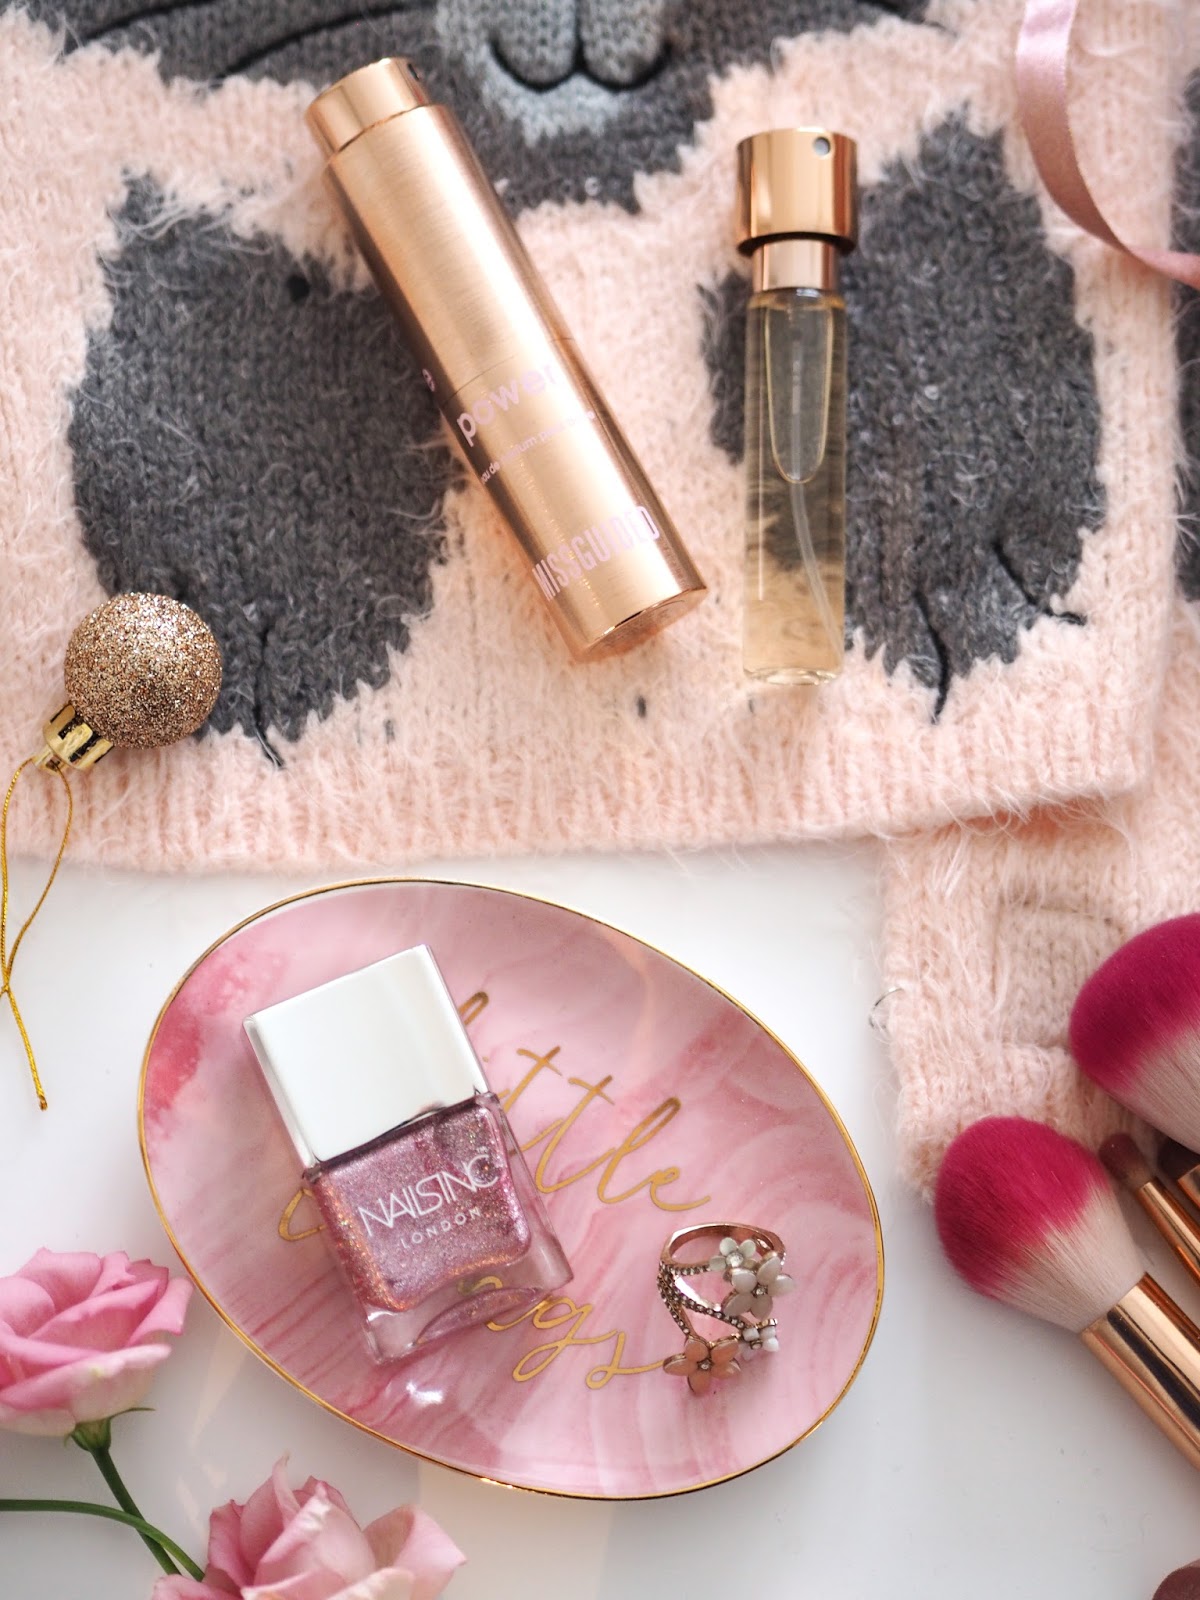 The Pink Gift Guide, Katie Kirk Loves, UK Blogger, Beauty Blogger, Christmas, Christmas Gifts, Gift Guide, Gift Ideas, Beauty Gifts, lifestyle, Luxury Gifts, Pink Gifts, Pink Make Up, Pink Accessories, Pink Lover, Anthropologie, Yumi Clothing, Cat Scarf, Accessorize, Charlotte Tilbury, Viktor & Rolf Flower Bomb, Etst Shop, Cult Beauty, Debenhams Beauty, Hourglass Cosmetics, Becca Cosmetics, Lush Cosmetics, Snow Fairy, Bluebelle & Co, House of Disaster, Disaster Designs, Spectrum Collections, Oasis Fashion, Rose Gold, Nails Inc, Incredible Cosmetics, Yankee Candle, Snowflake Cookie